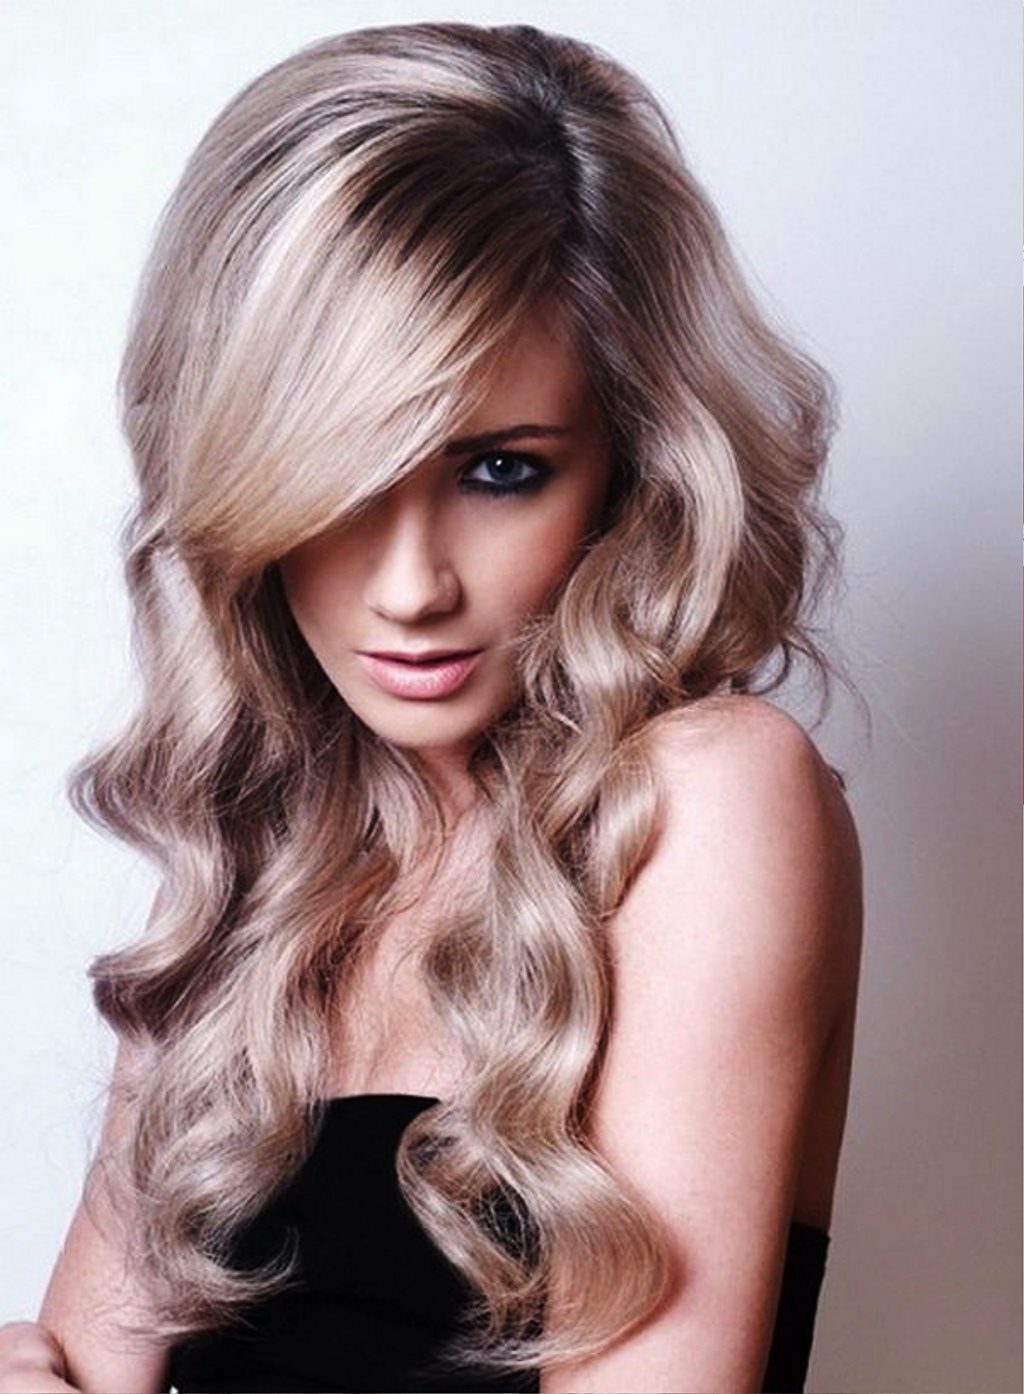 Best Party Hairstyles Long Hair 2013